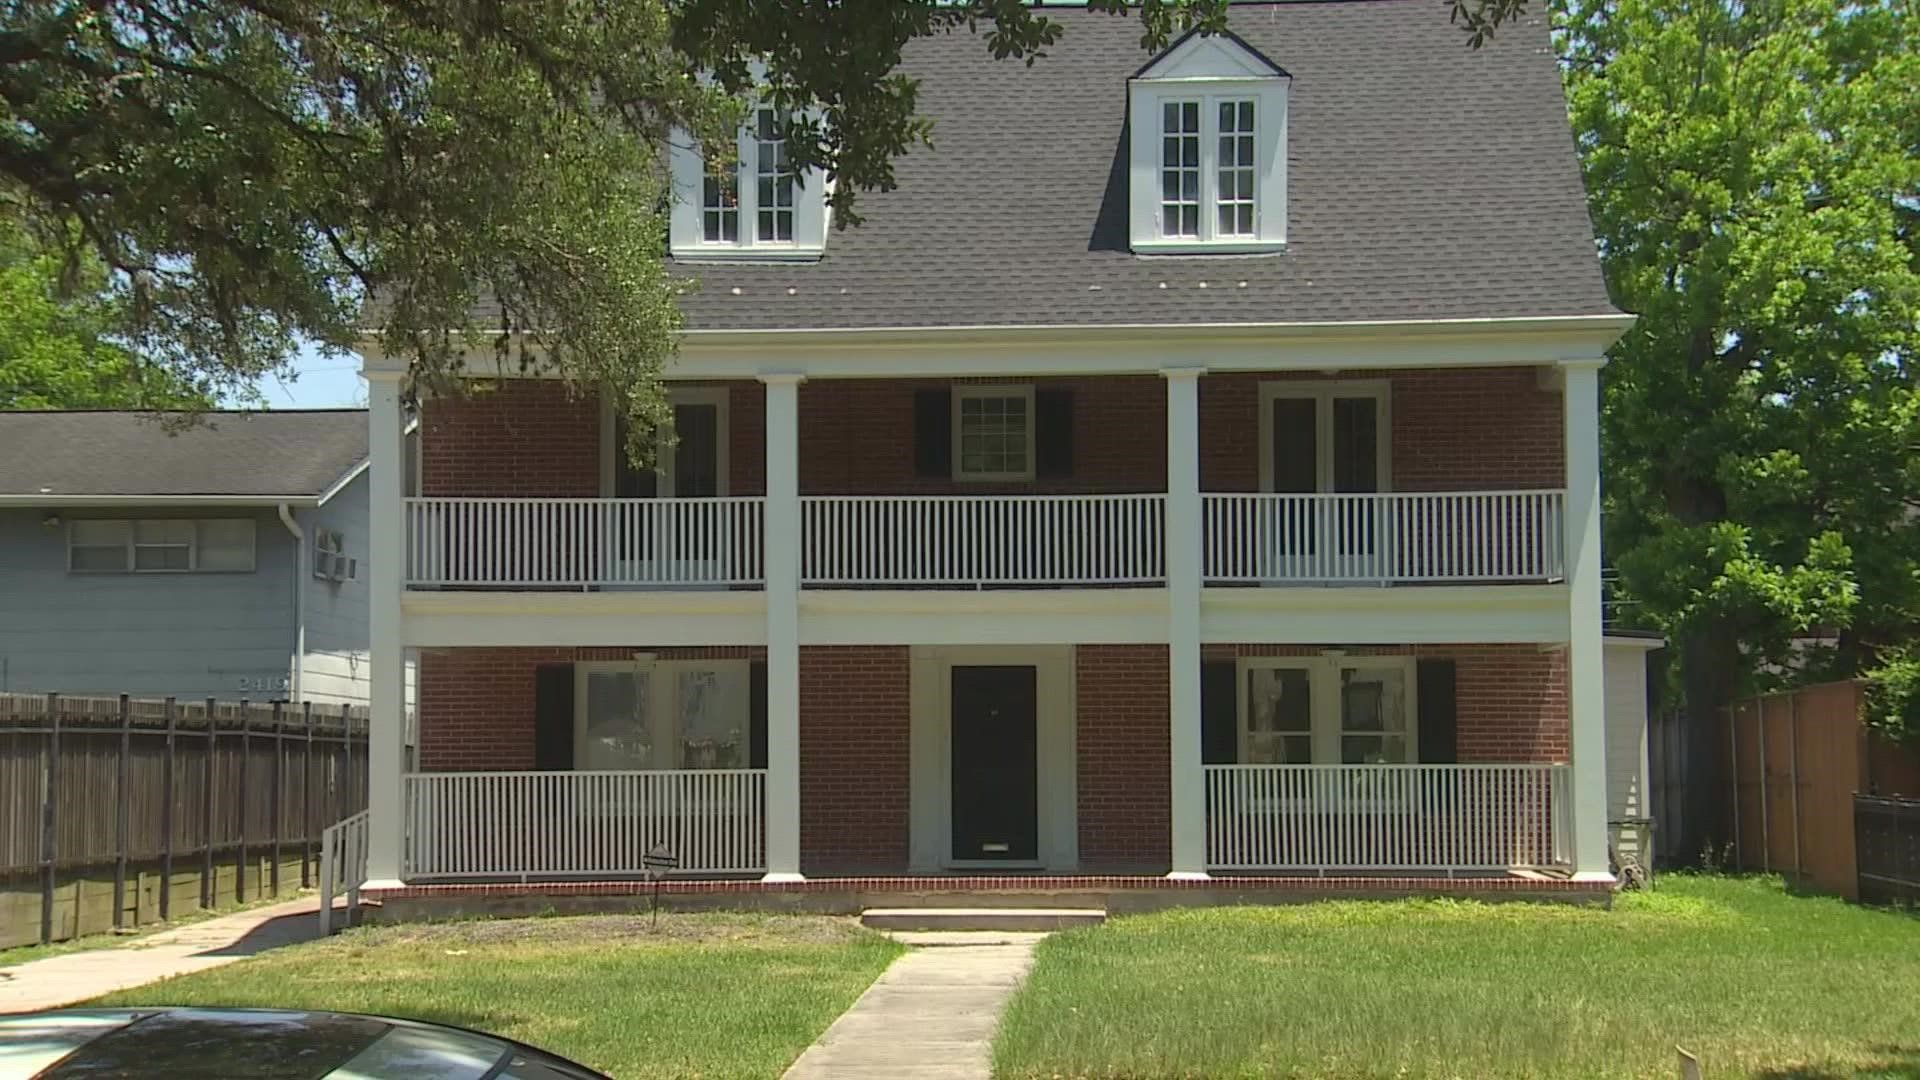 The Riverside Terrace subdivision is marked by its historical character, but a proposal to make a portion of the area a historic district has homeowners divided.